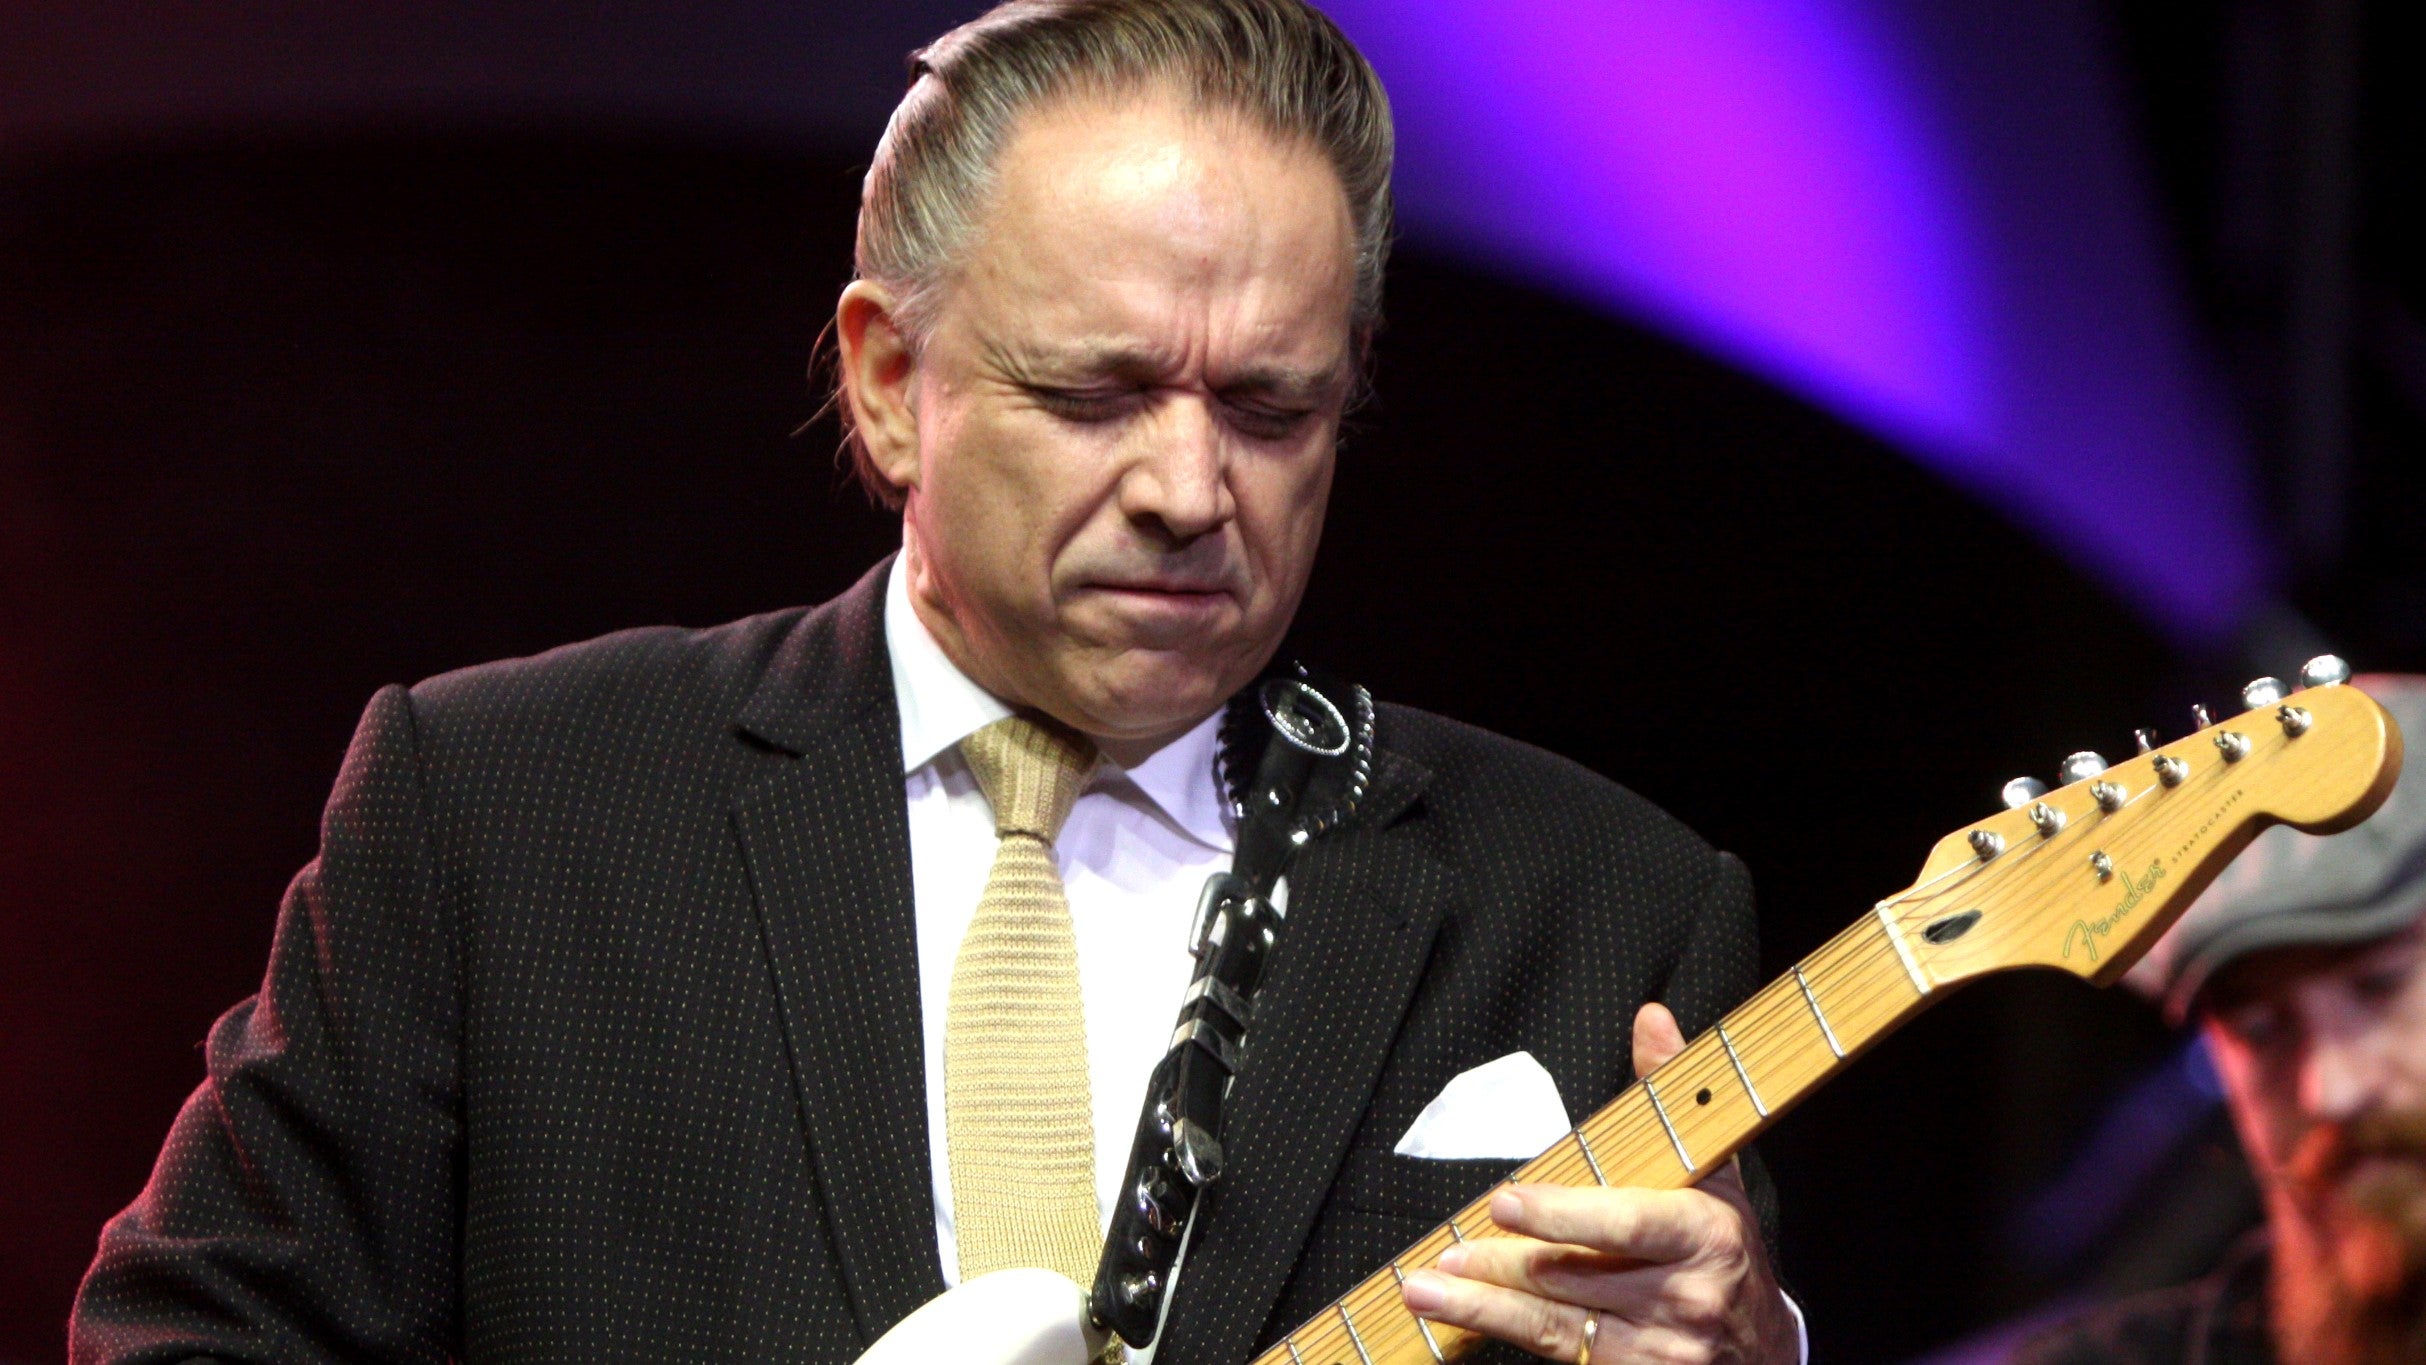 Jimmie Vaughan at The Coach House